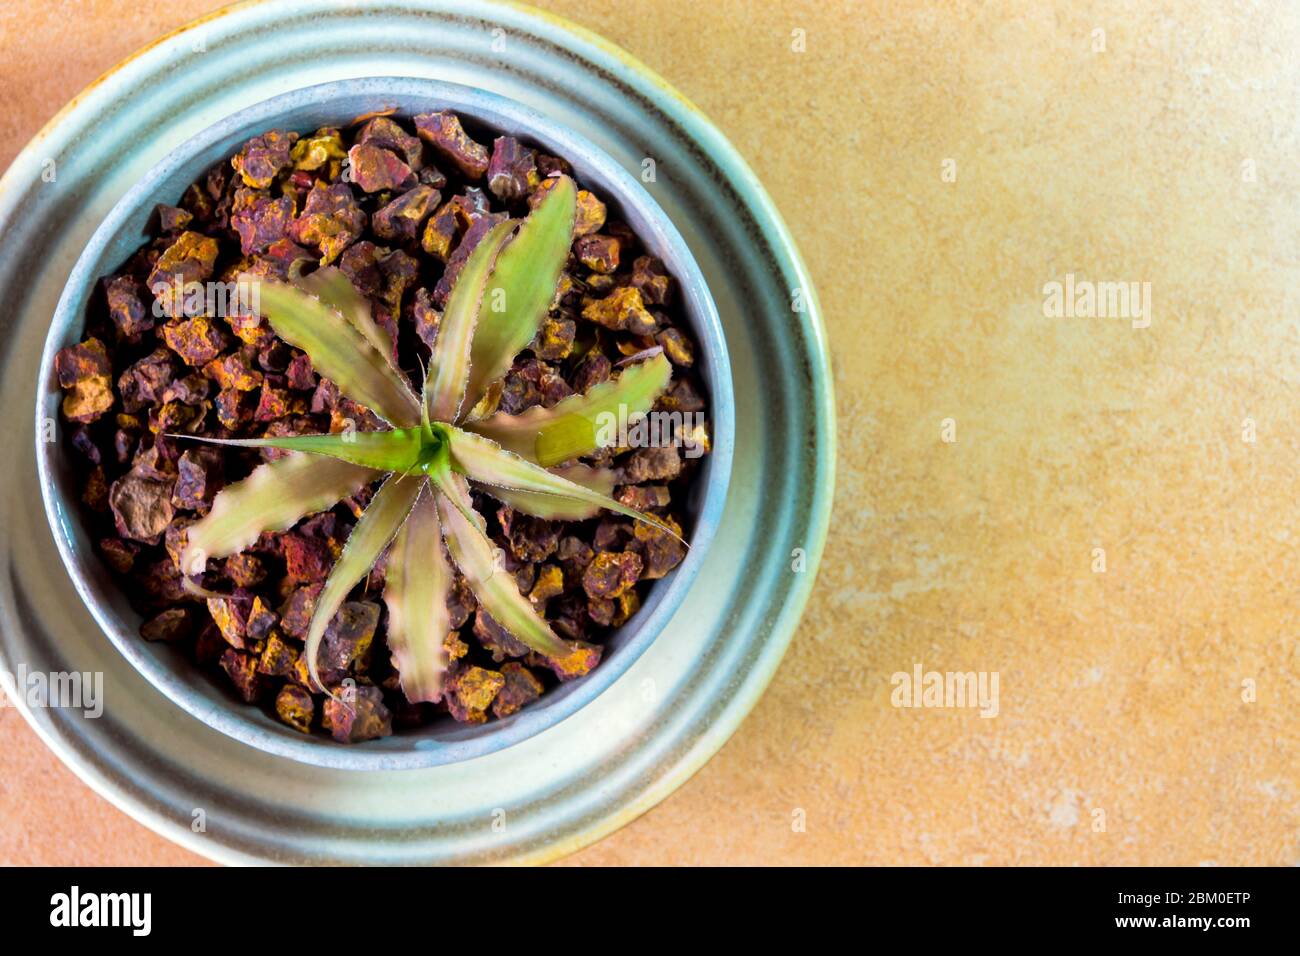 Orthophytum bromeliad growing in the small ceramic pot, houseplant for room decoration Stock Photo